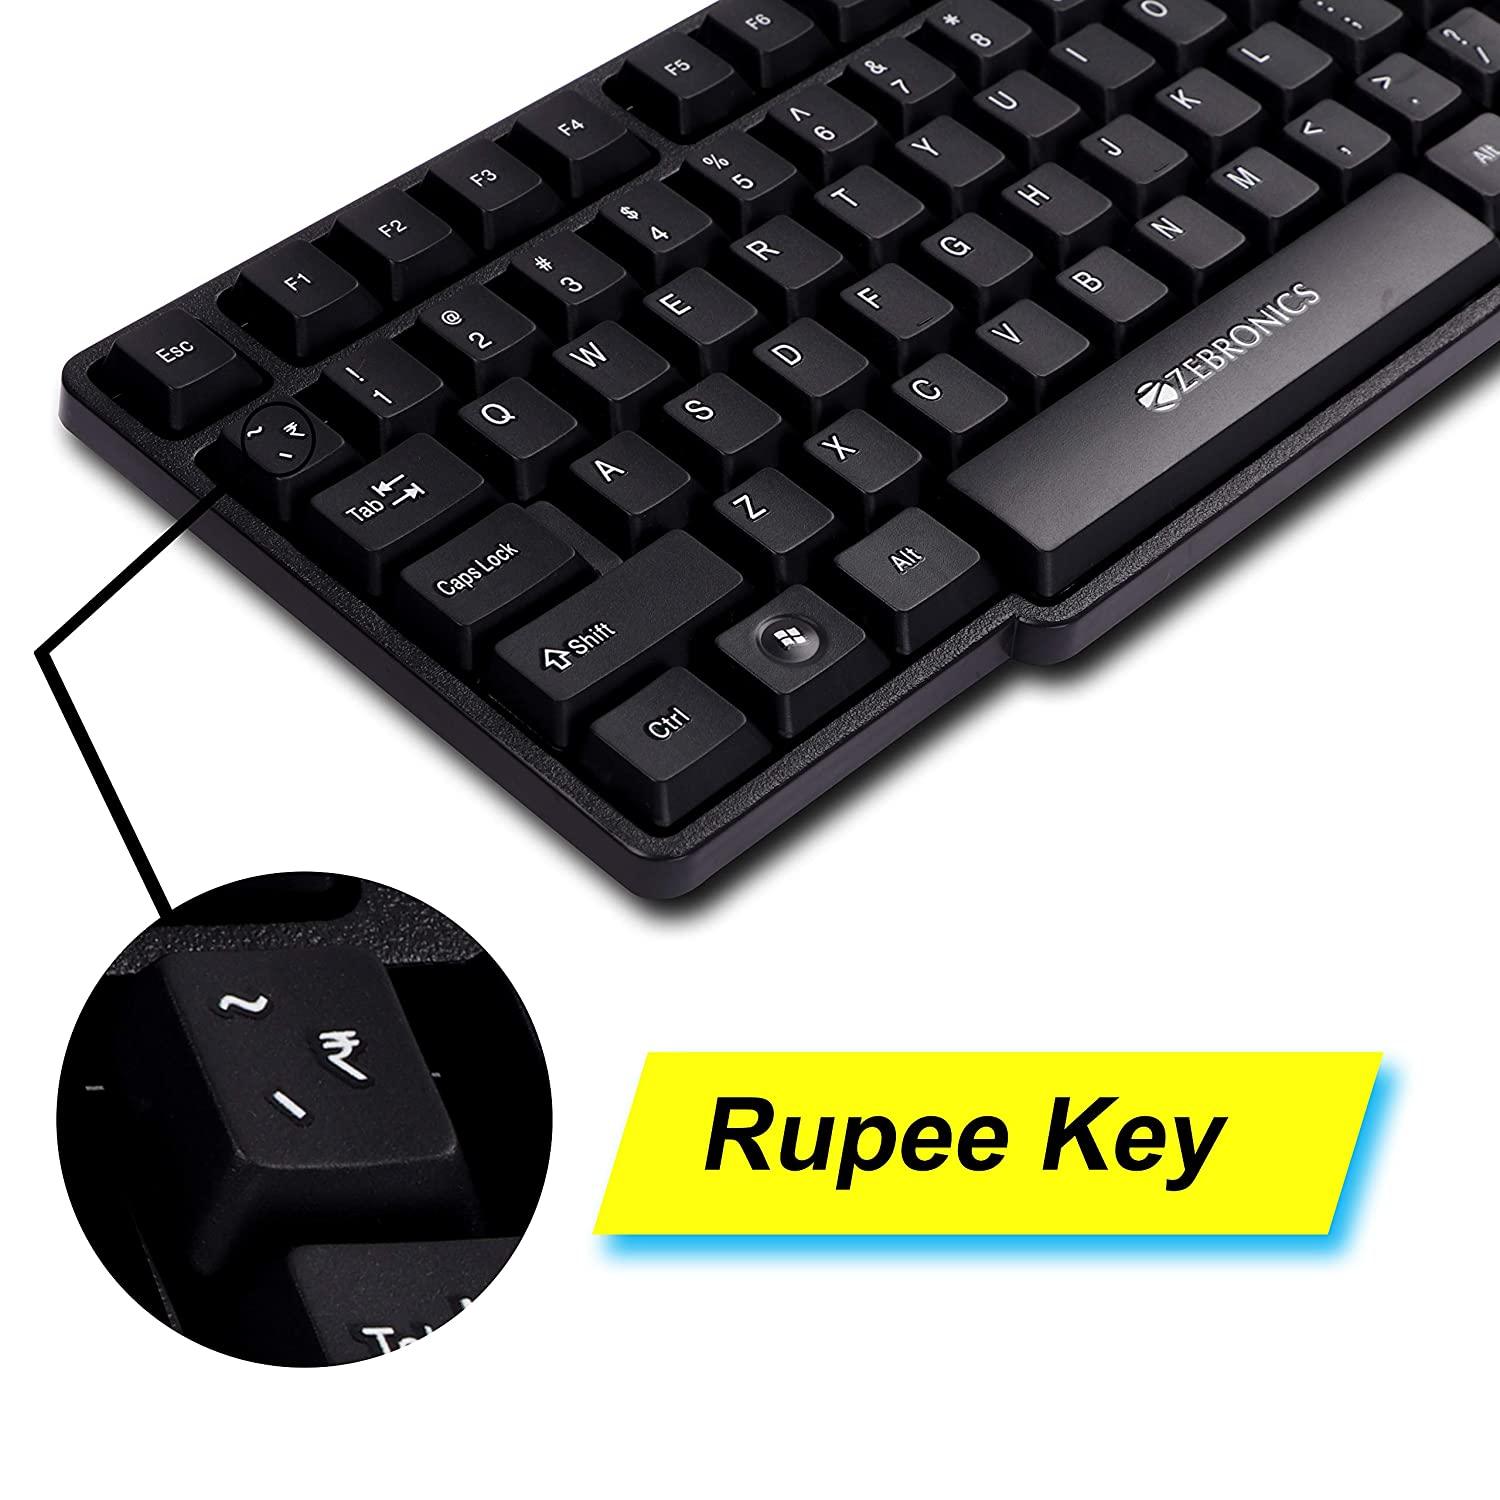 Zebronics Wired Keyboard and Mouse Combo with 104 Keys and a USB Mouse with 1200 DPI - JUDWAA 750 -A - onBeli